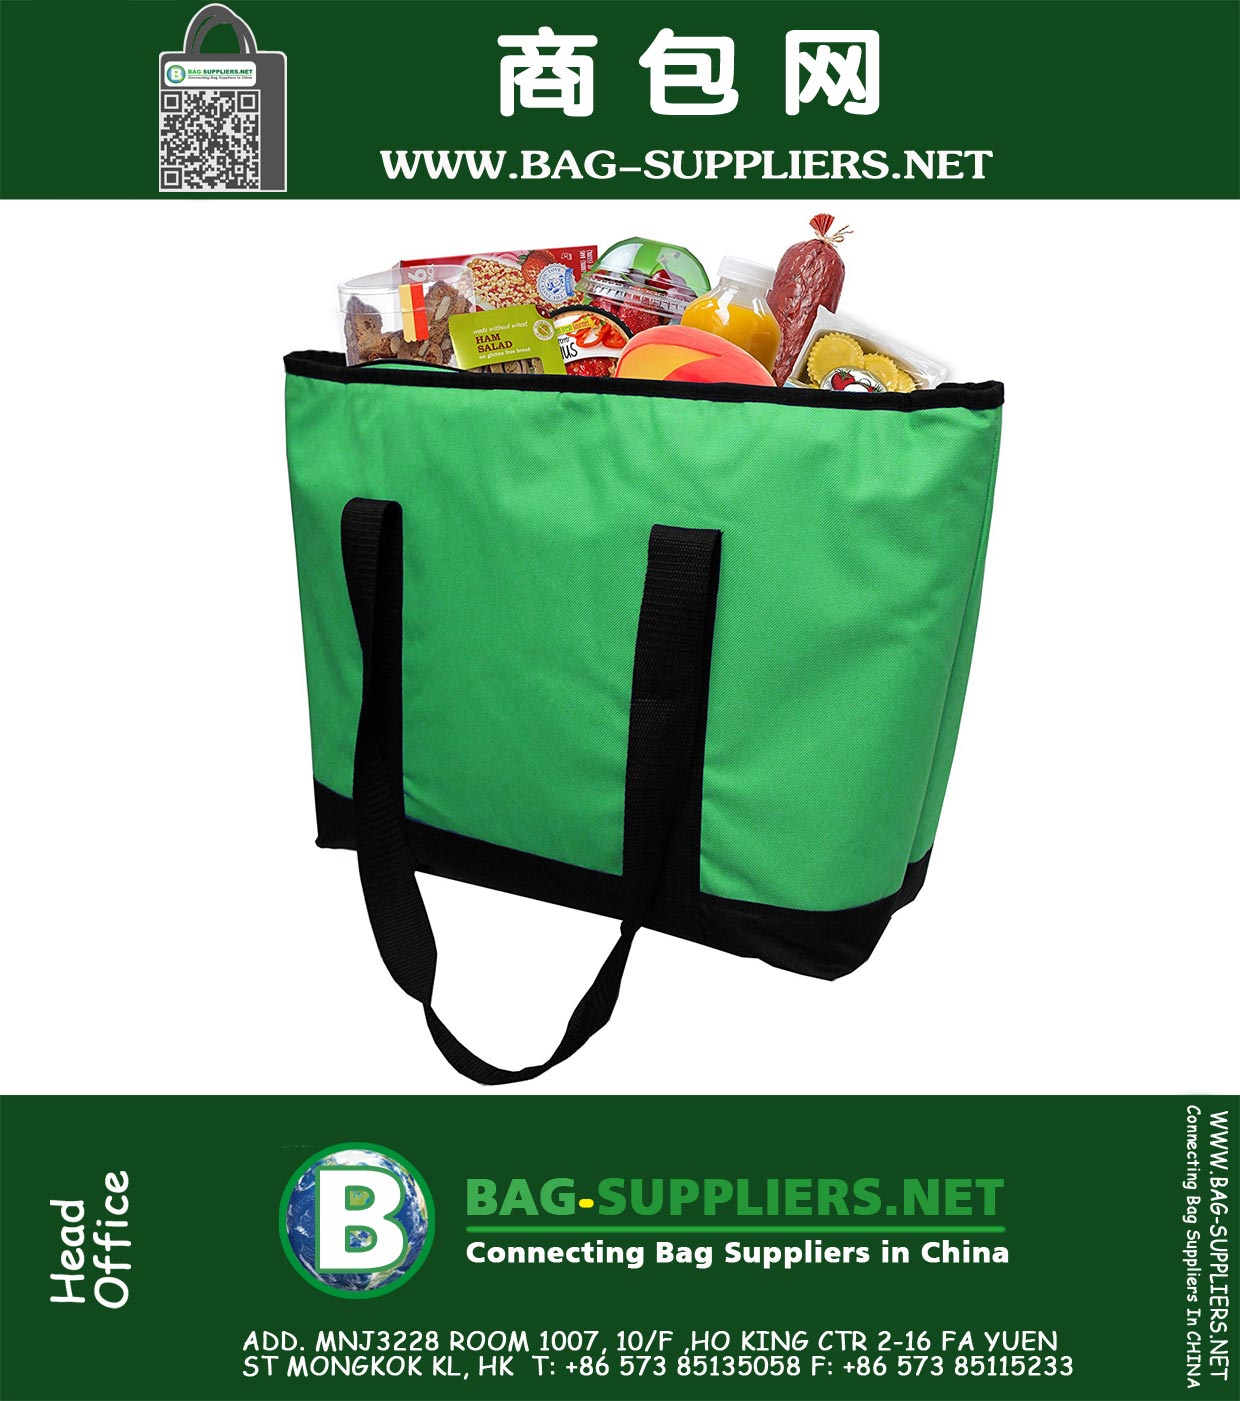 Insulated Grocery Bag Shopping Tote with WATERPROOF LINING and ZIPPER Closure - Extra Large Heavy Duty Nylon